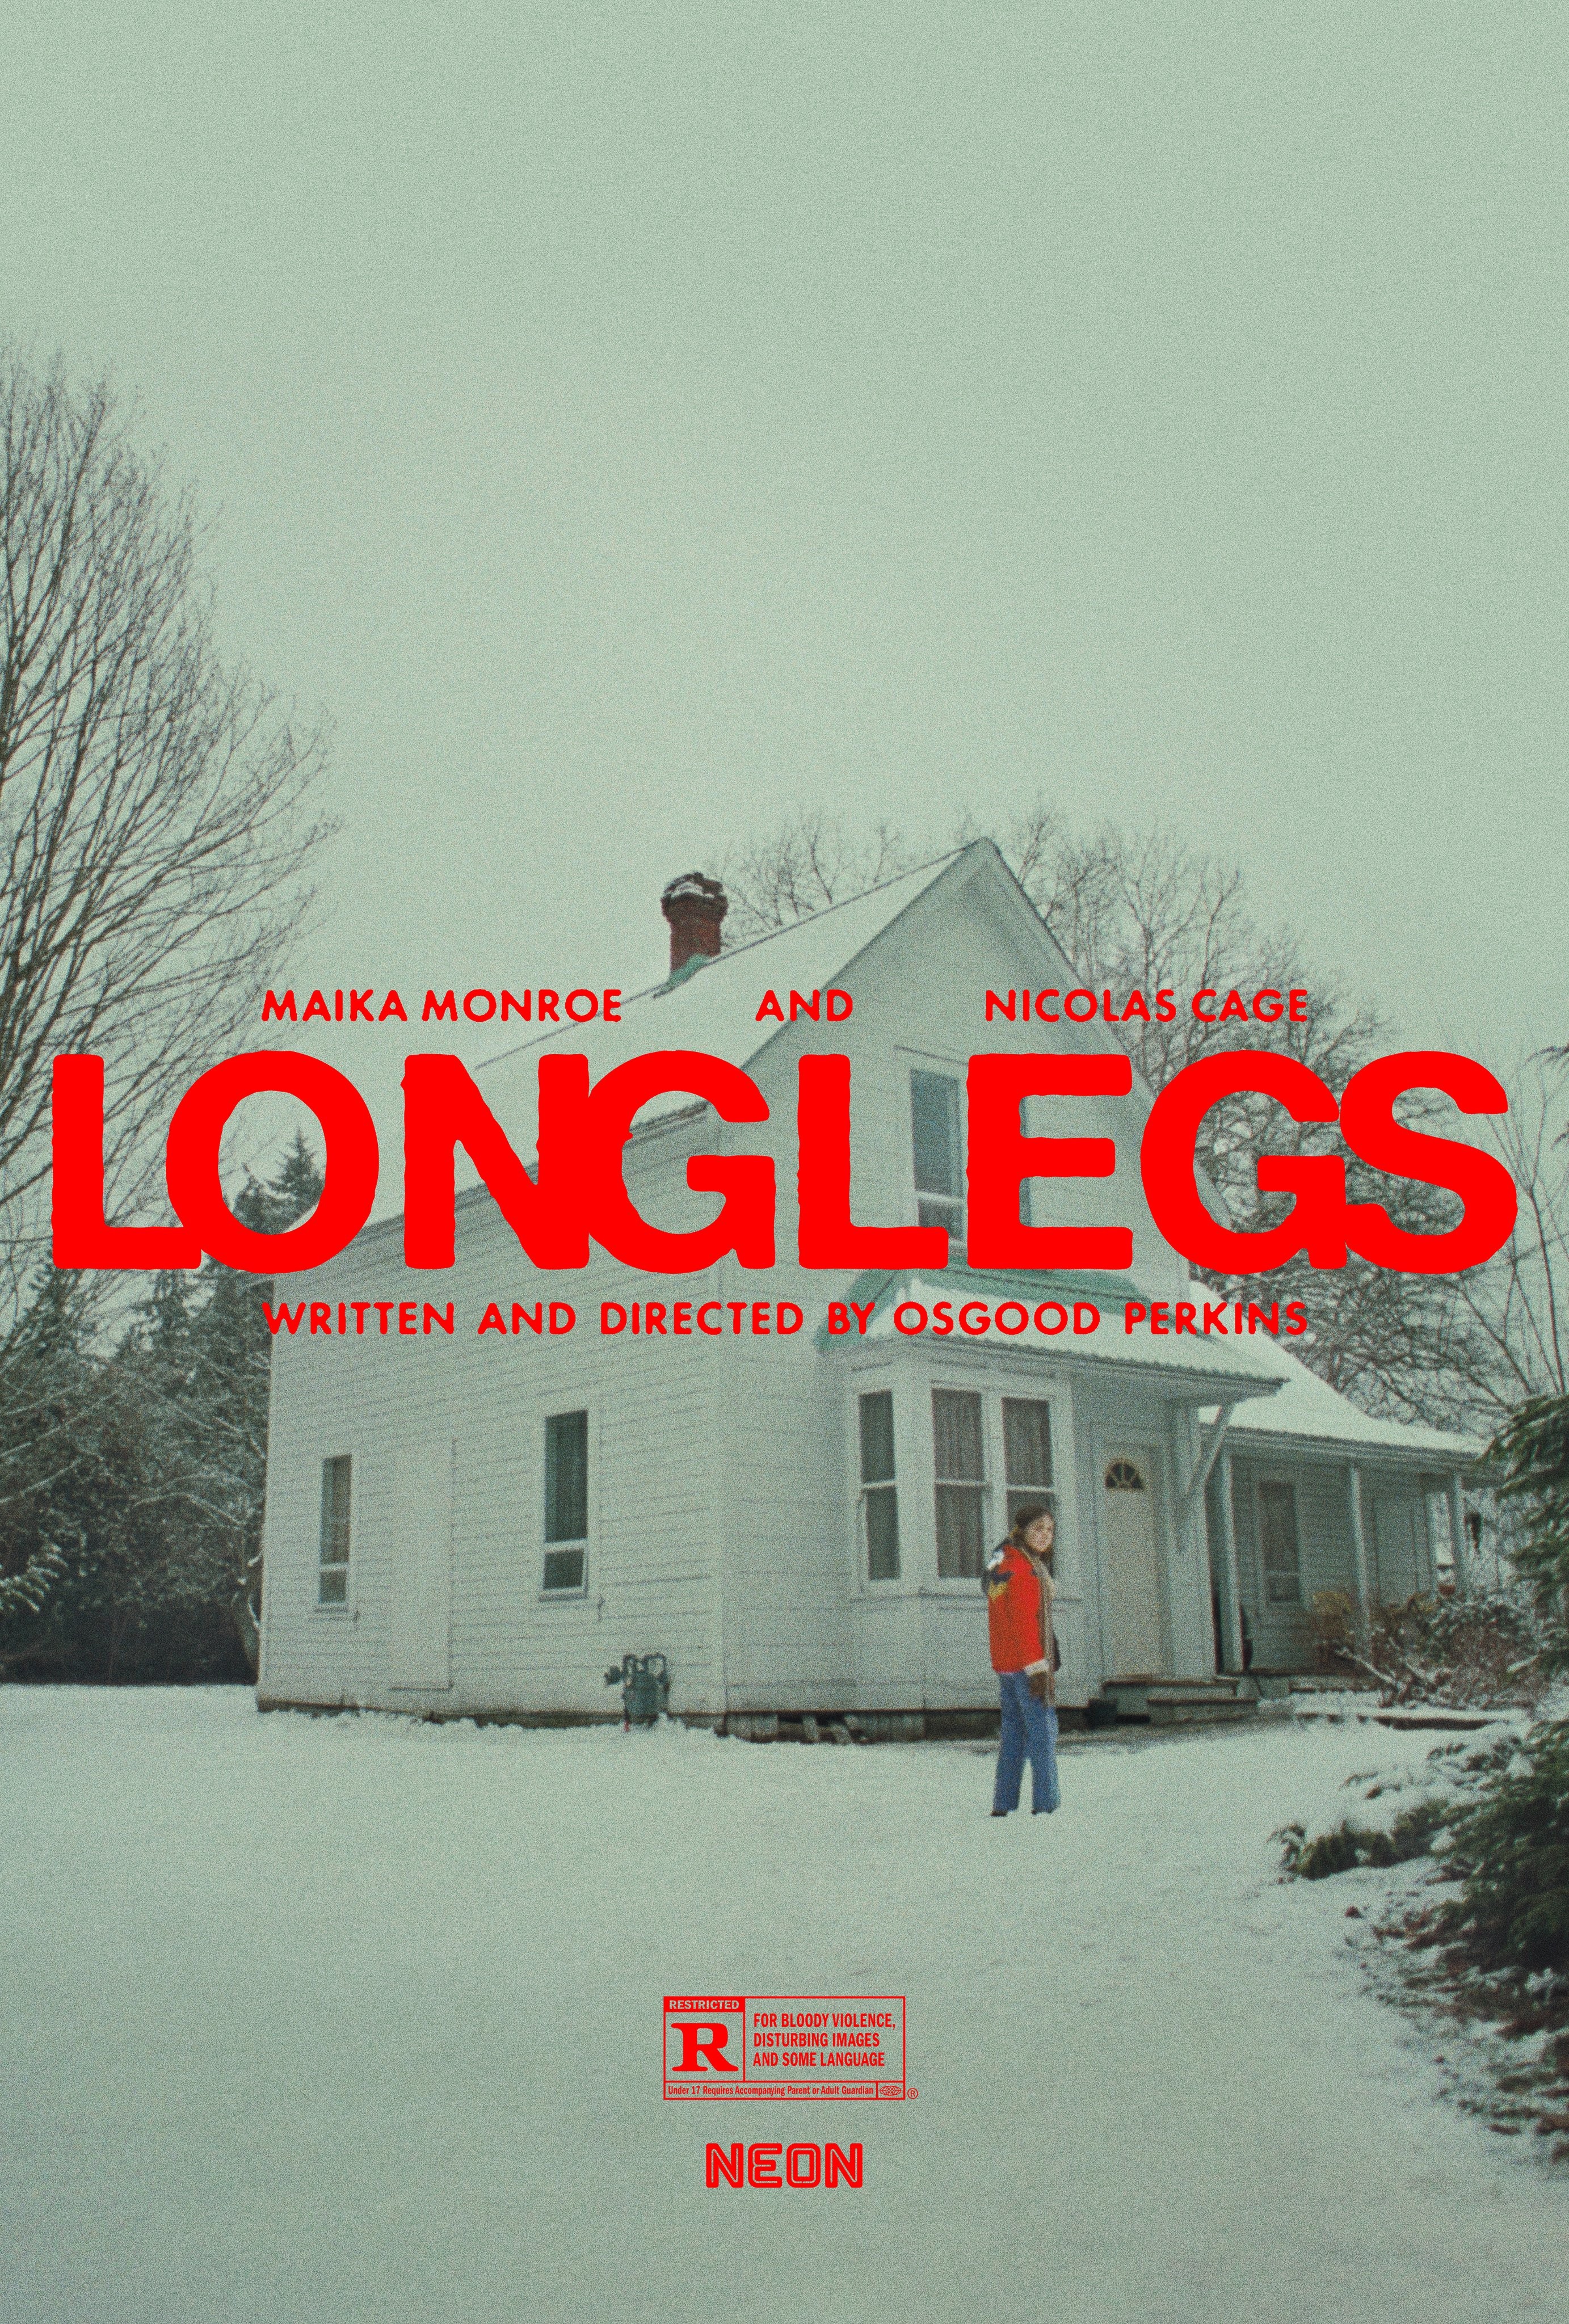 FBI Agent Lee Harker is an FBI Agent who's assigned to a serial killer case that's never been solved. When the case takes an unexpected turn — and shows evidence of occult activity — Harker is horrified to learn he has a personal connection to the killer. Watch the <em>Longlegs</em> trailer <strong>here</strong>. <em>Longlegs hits theaters July 12 and stars Maika Monroe, Nicolas Cage, Alicia Witt and Blair Underwood.</em>